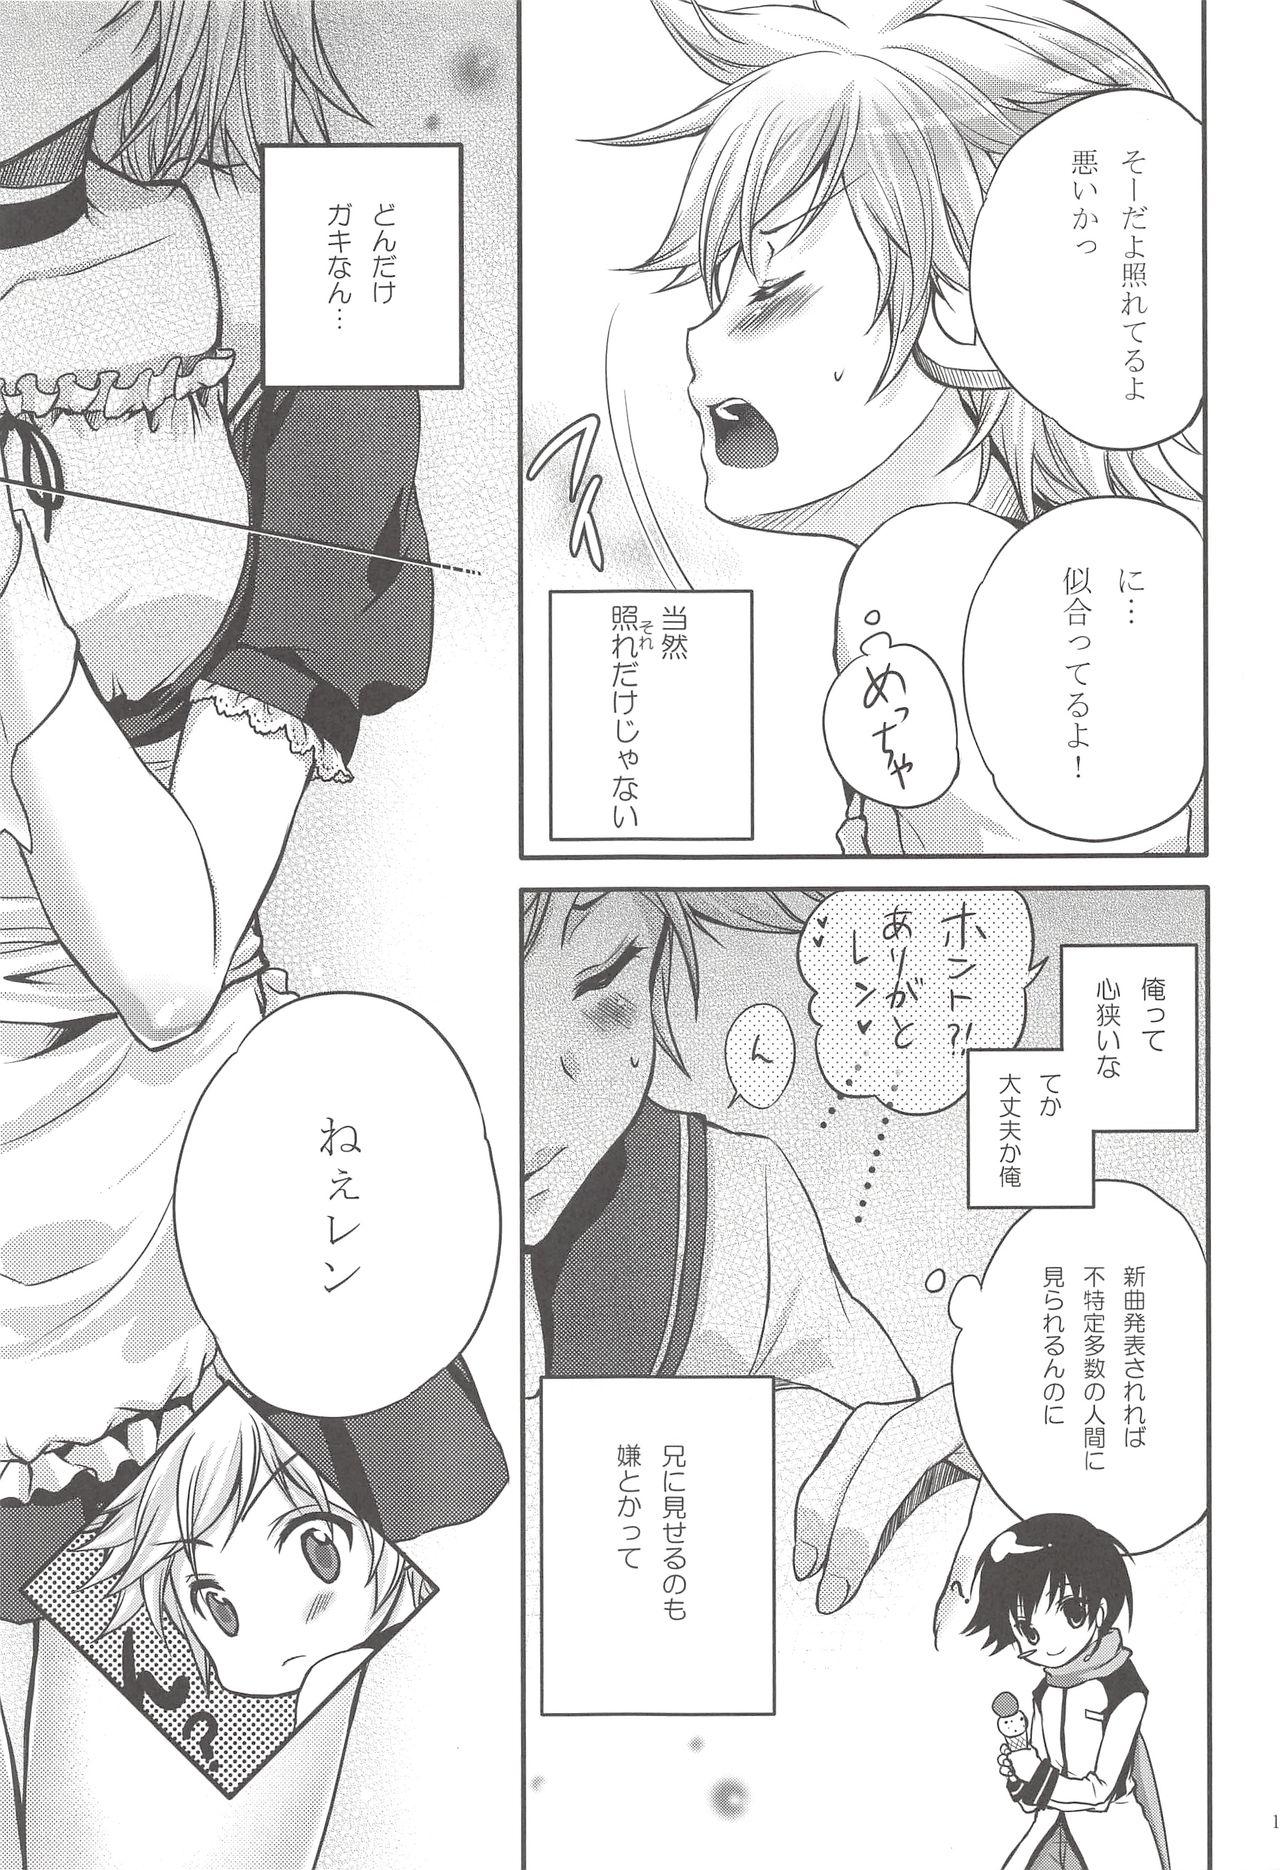 Cheerleader I serve domine - Vocaloid Hot Couple Sex - Page 12